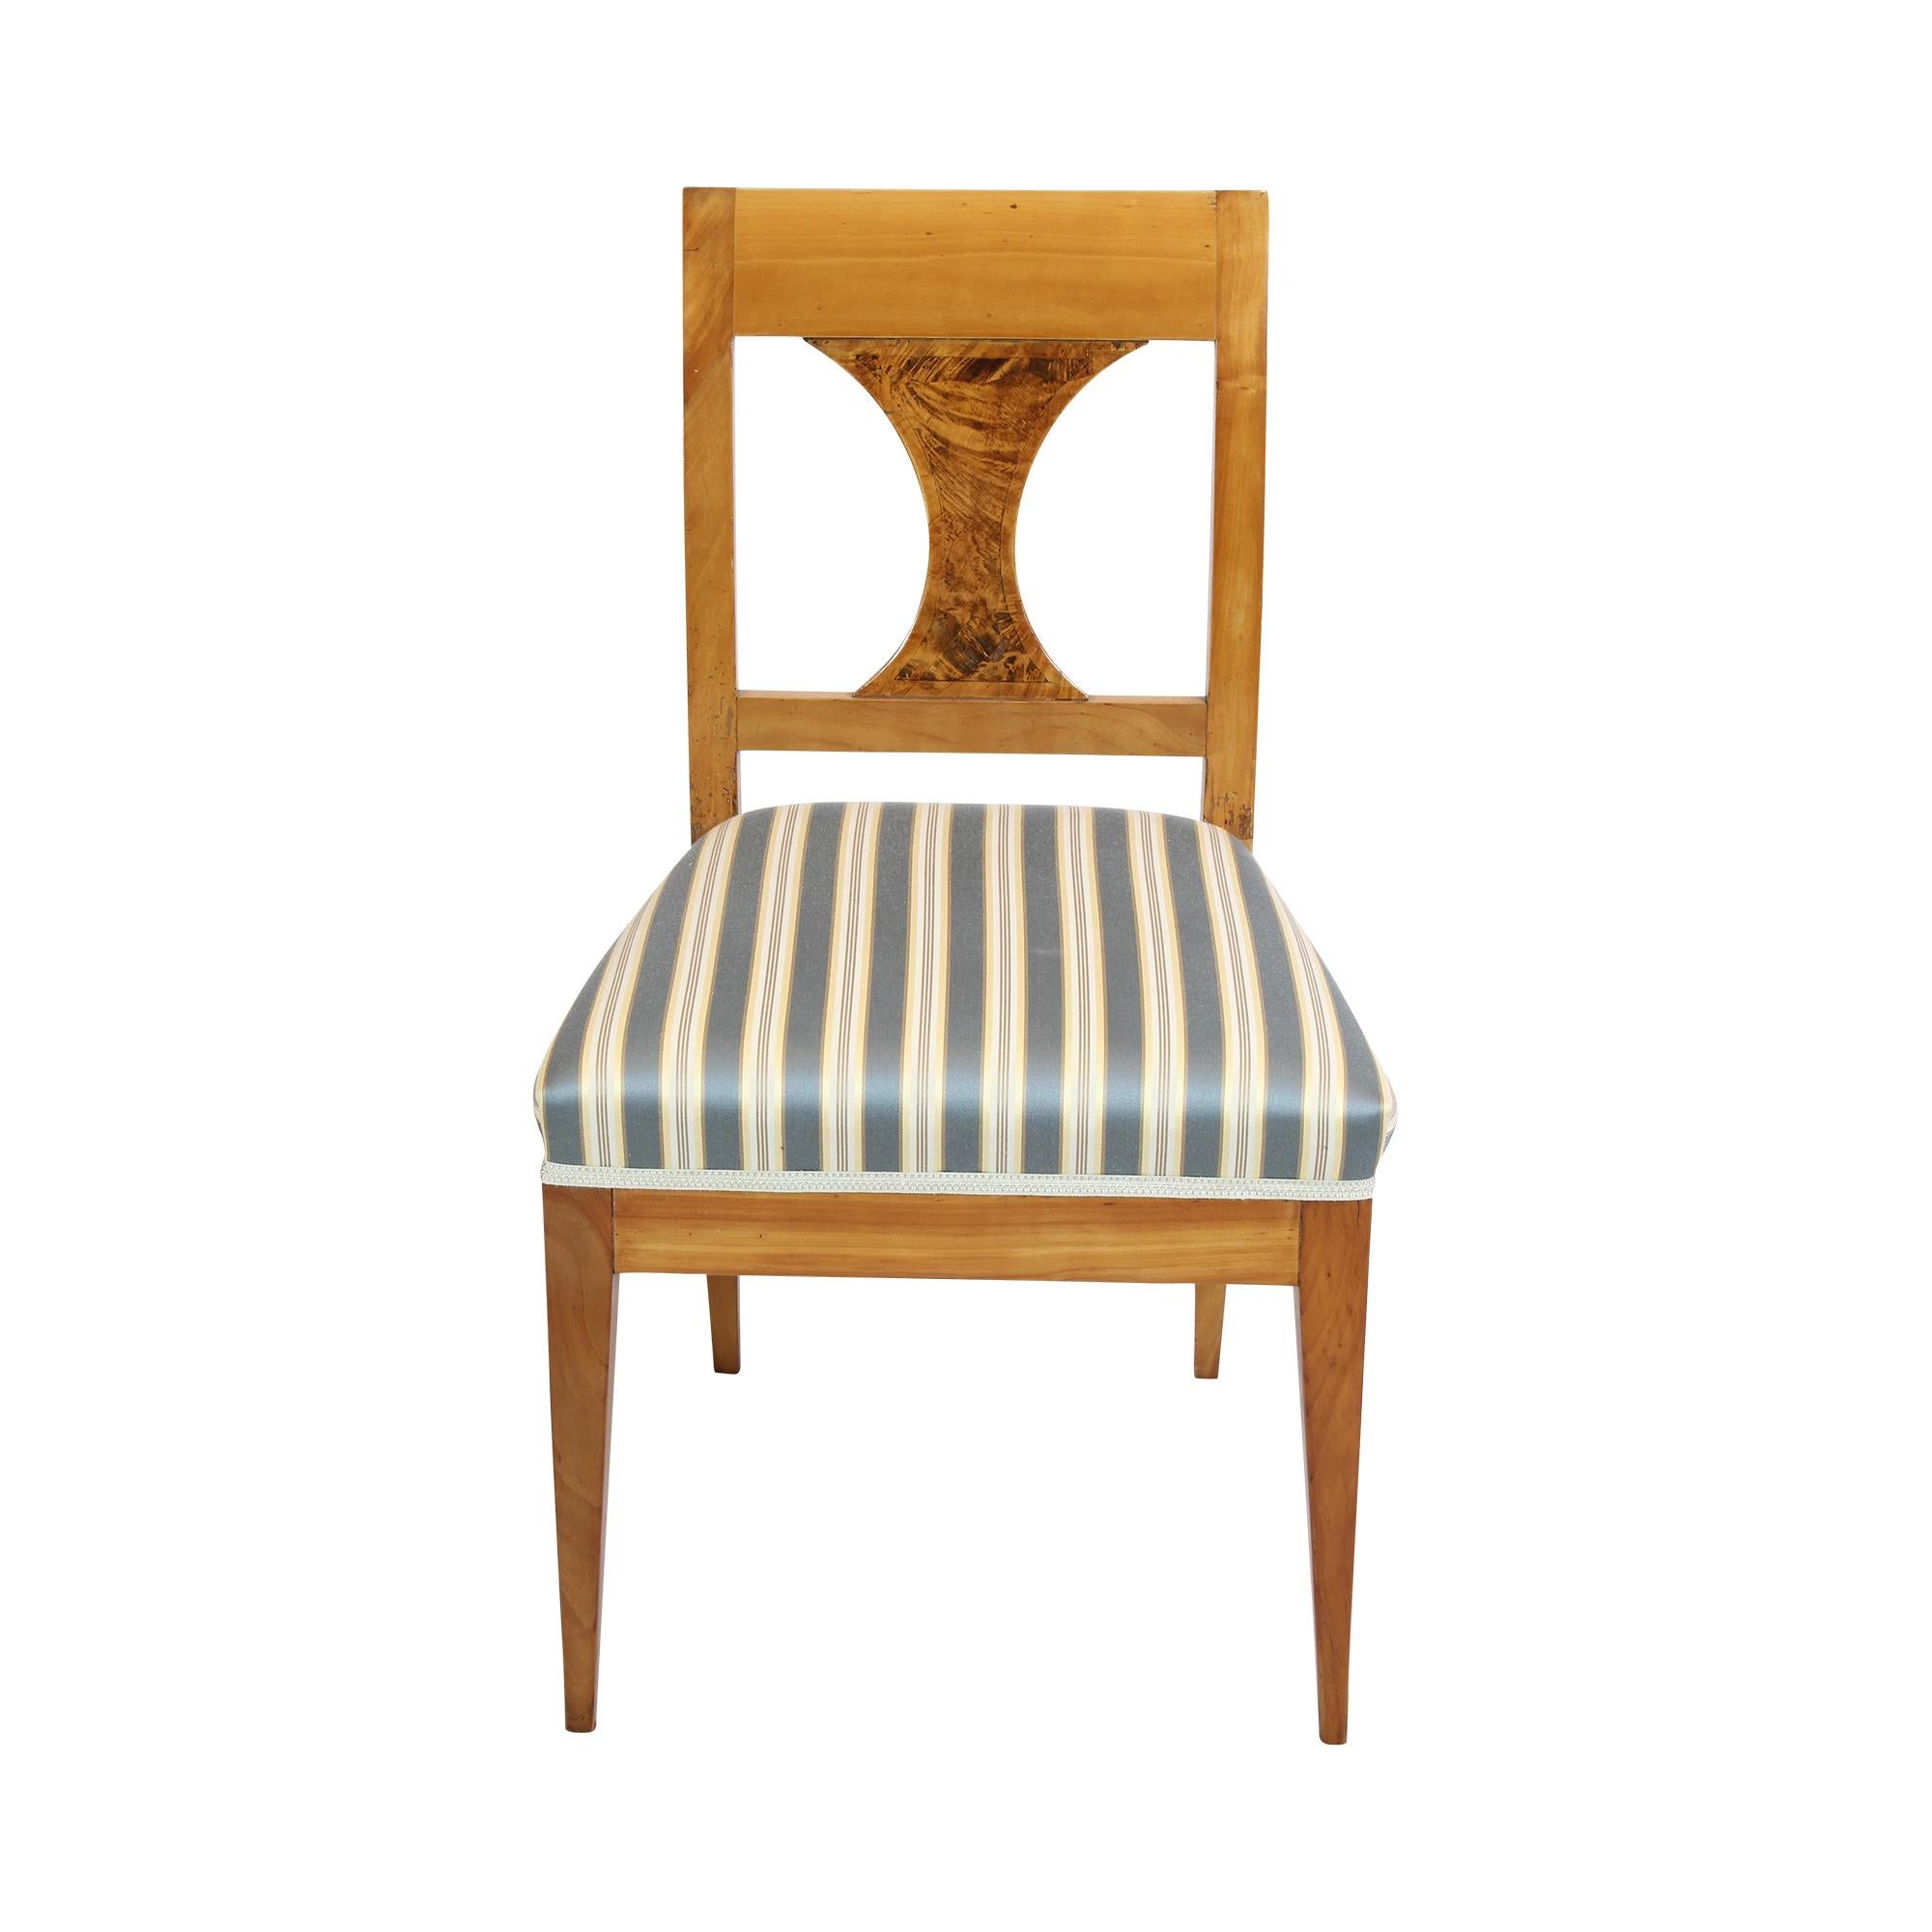 A chair from the Biedermeier period, ca. 1825. The chair is made of solid cherry wood. The chair is reupholstered and covered with new Biedermeier fabric. The center of the backrest is refined with birch wood. In very good restored condition.